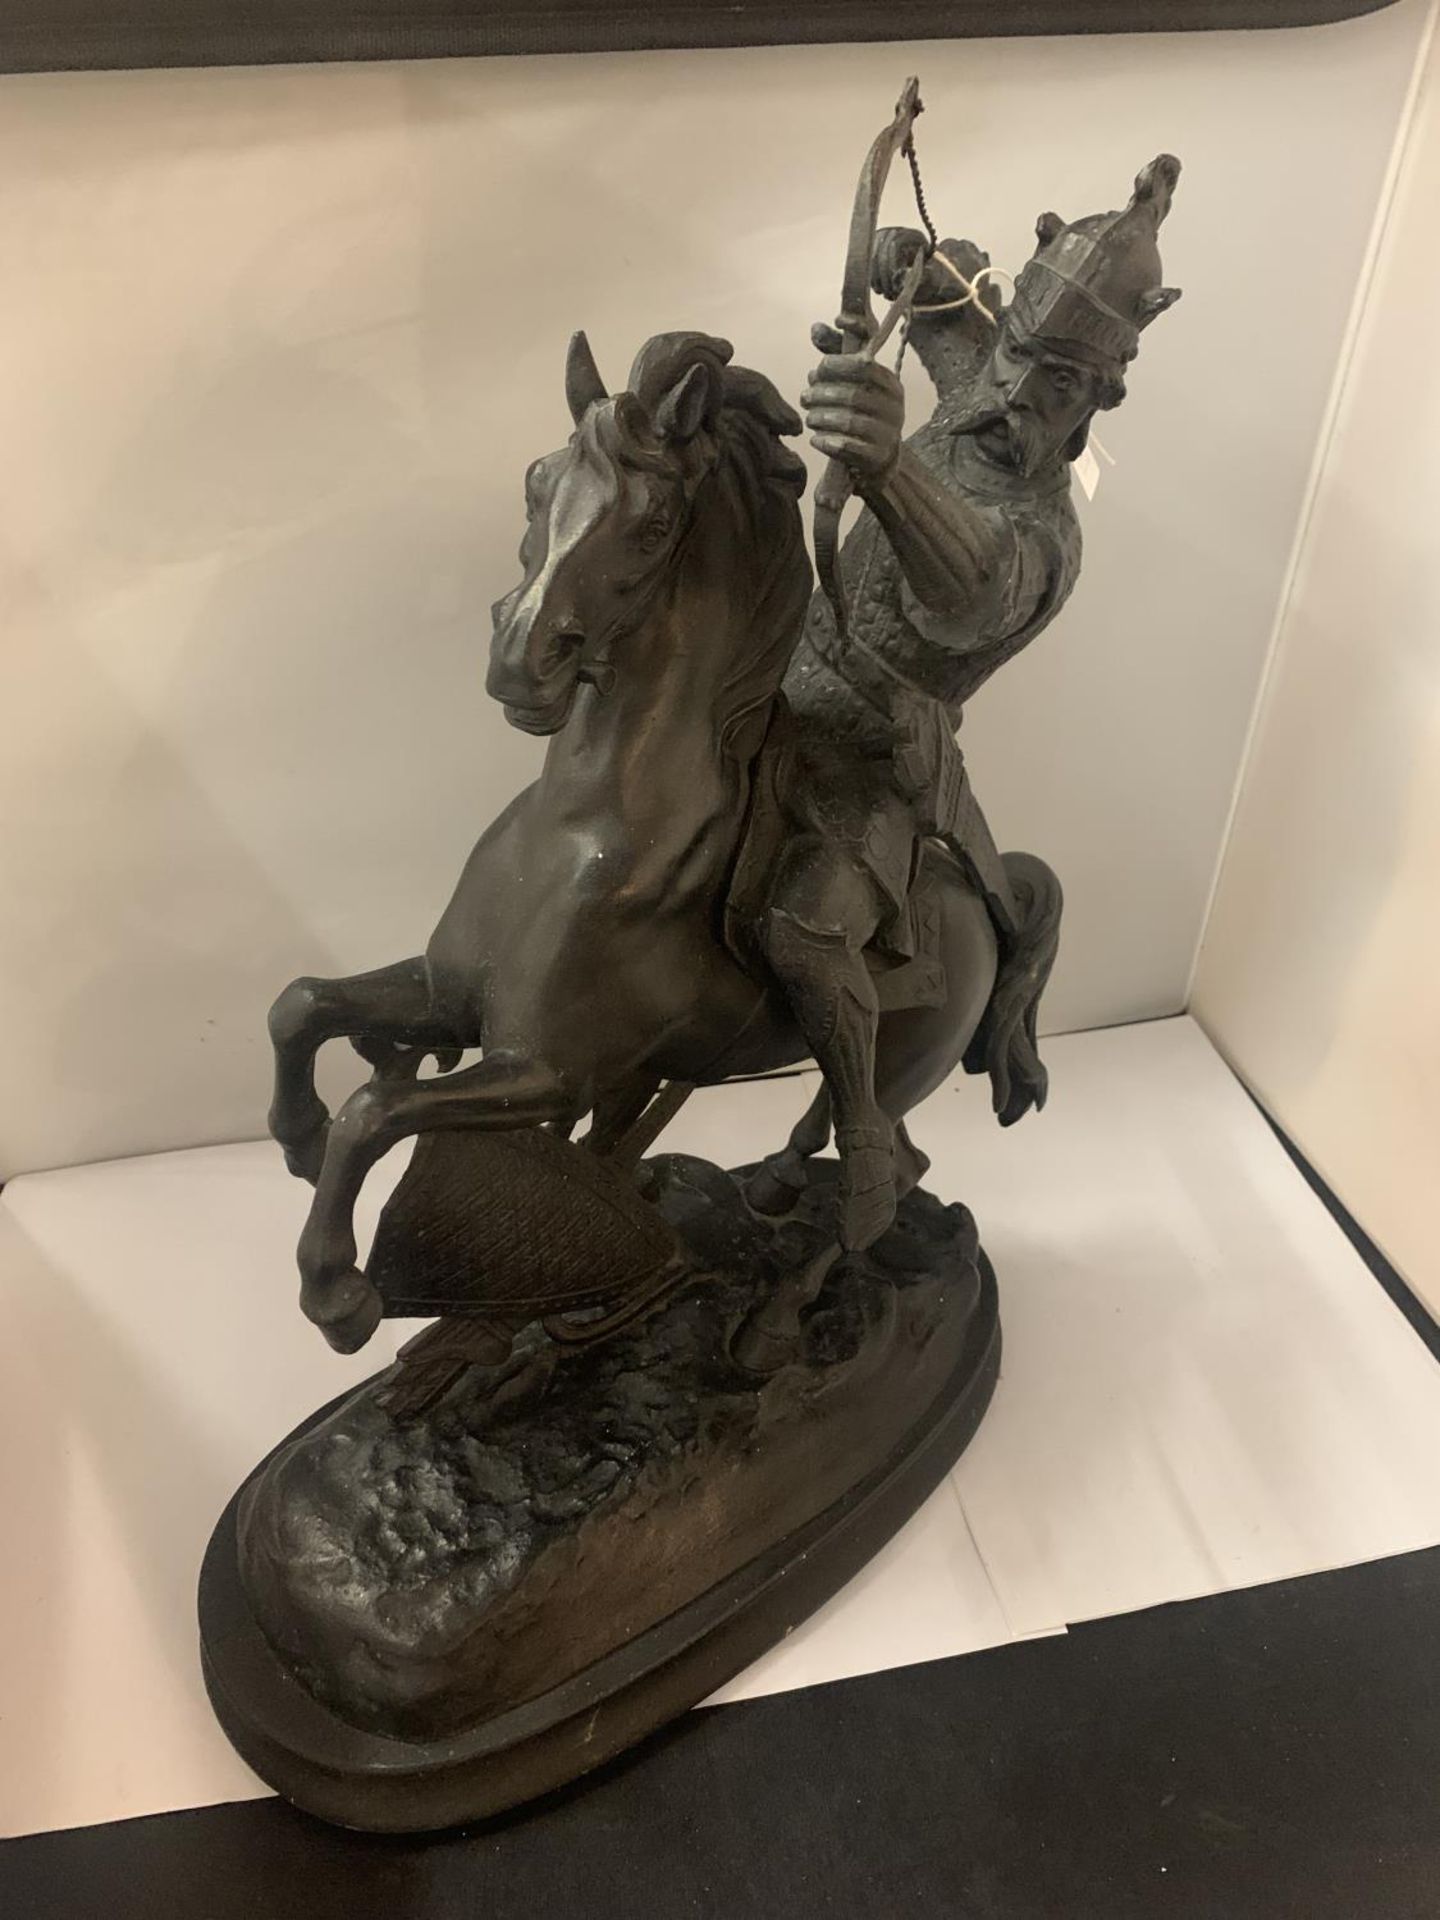 A PAIR OF MARLEY KNIGHT FIGURES ON HORSEBACK MOUNTED ON WOODEN PLINTHS, APPROX 47CM HEIGHT - Image 4 of 4